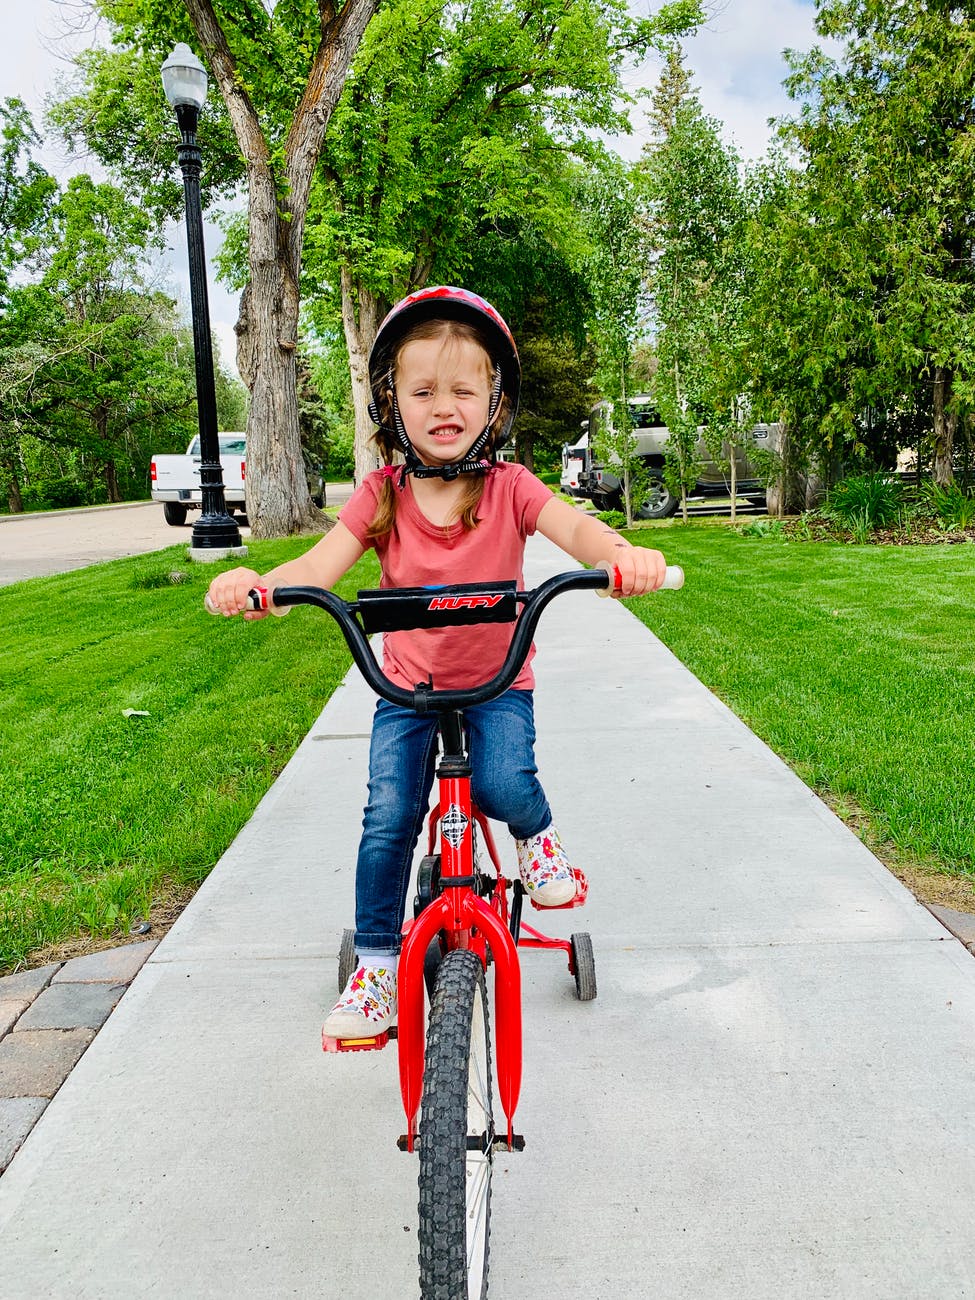 photo of young girl riding bike by sidewalk